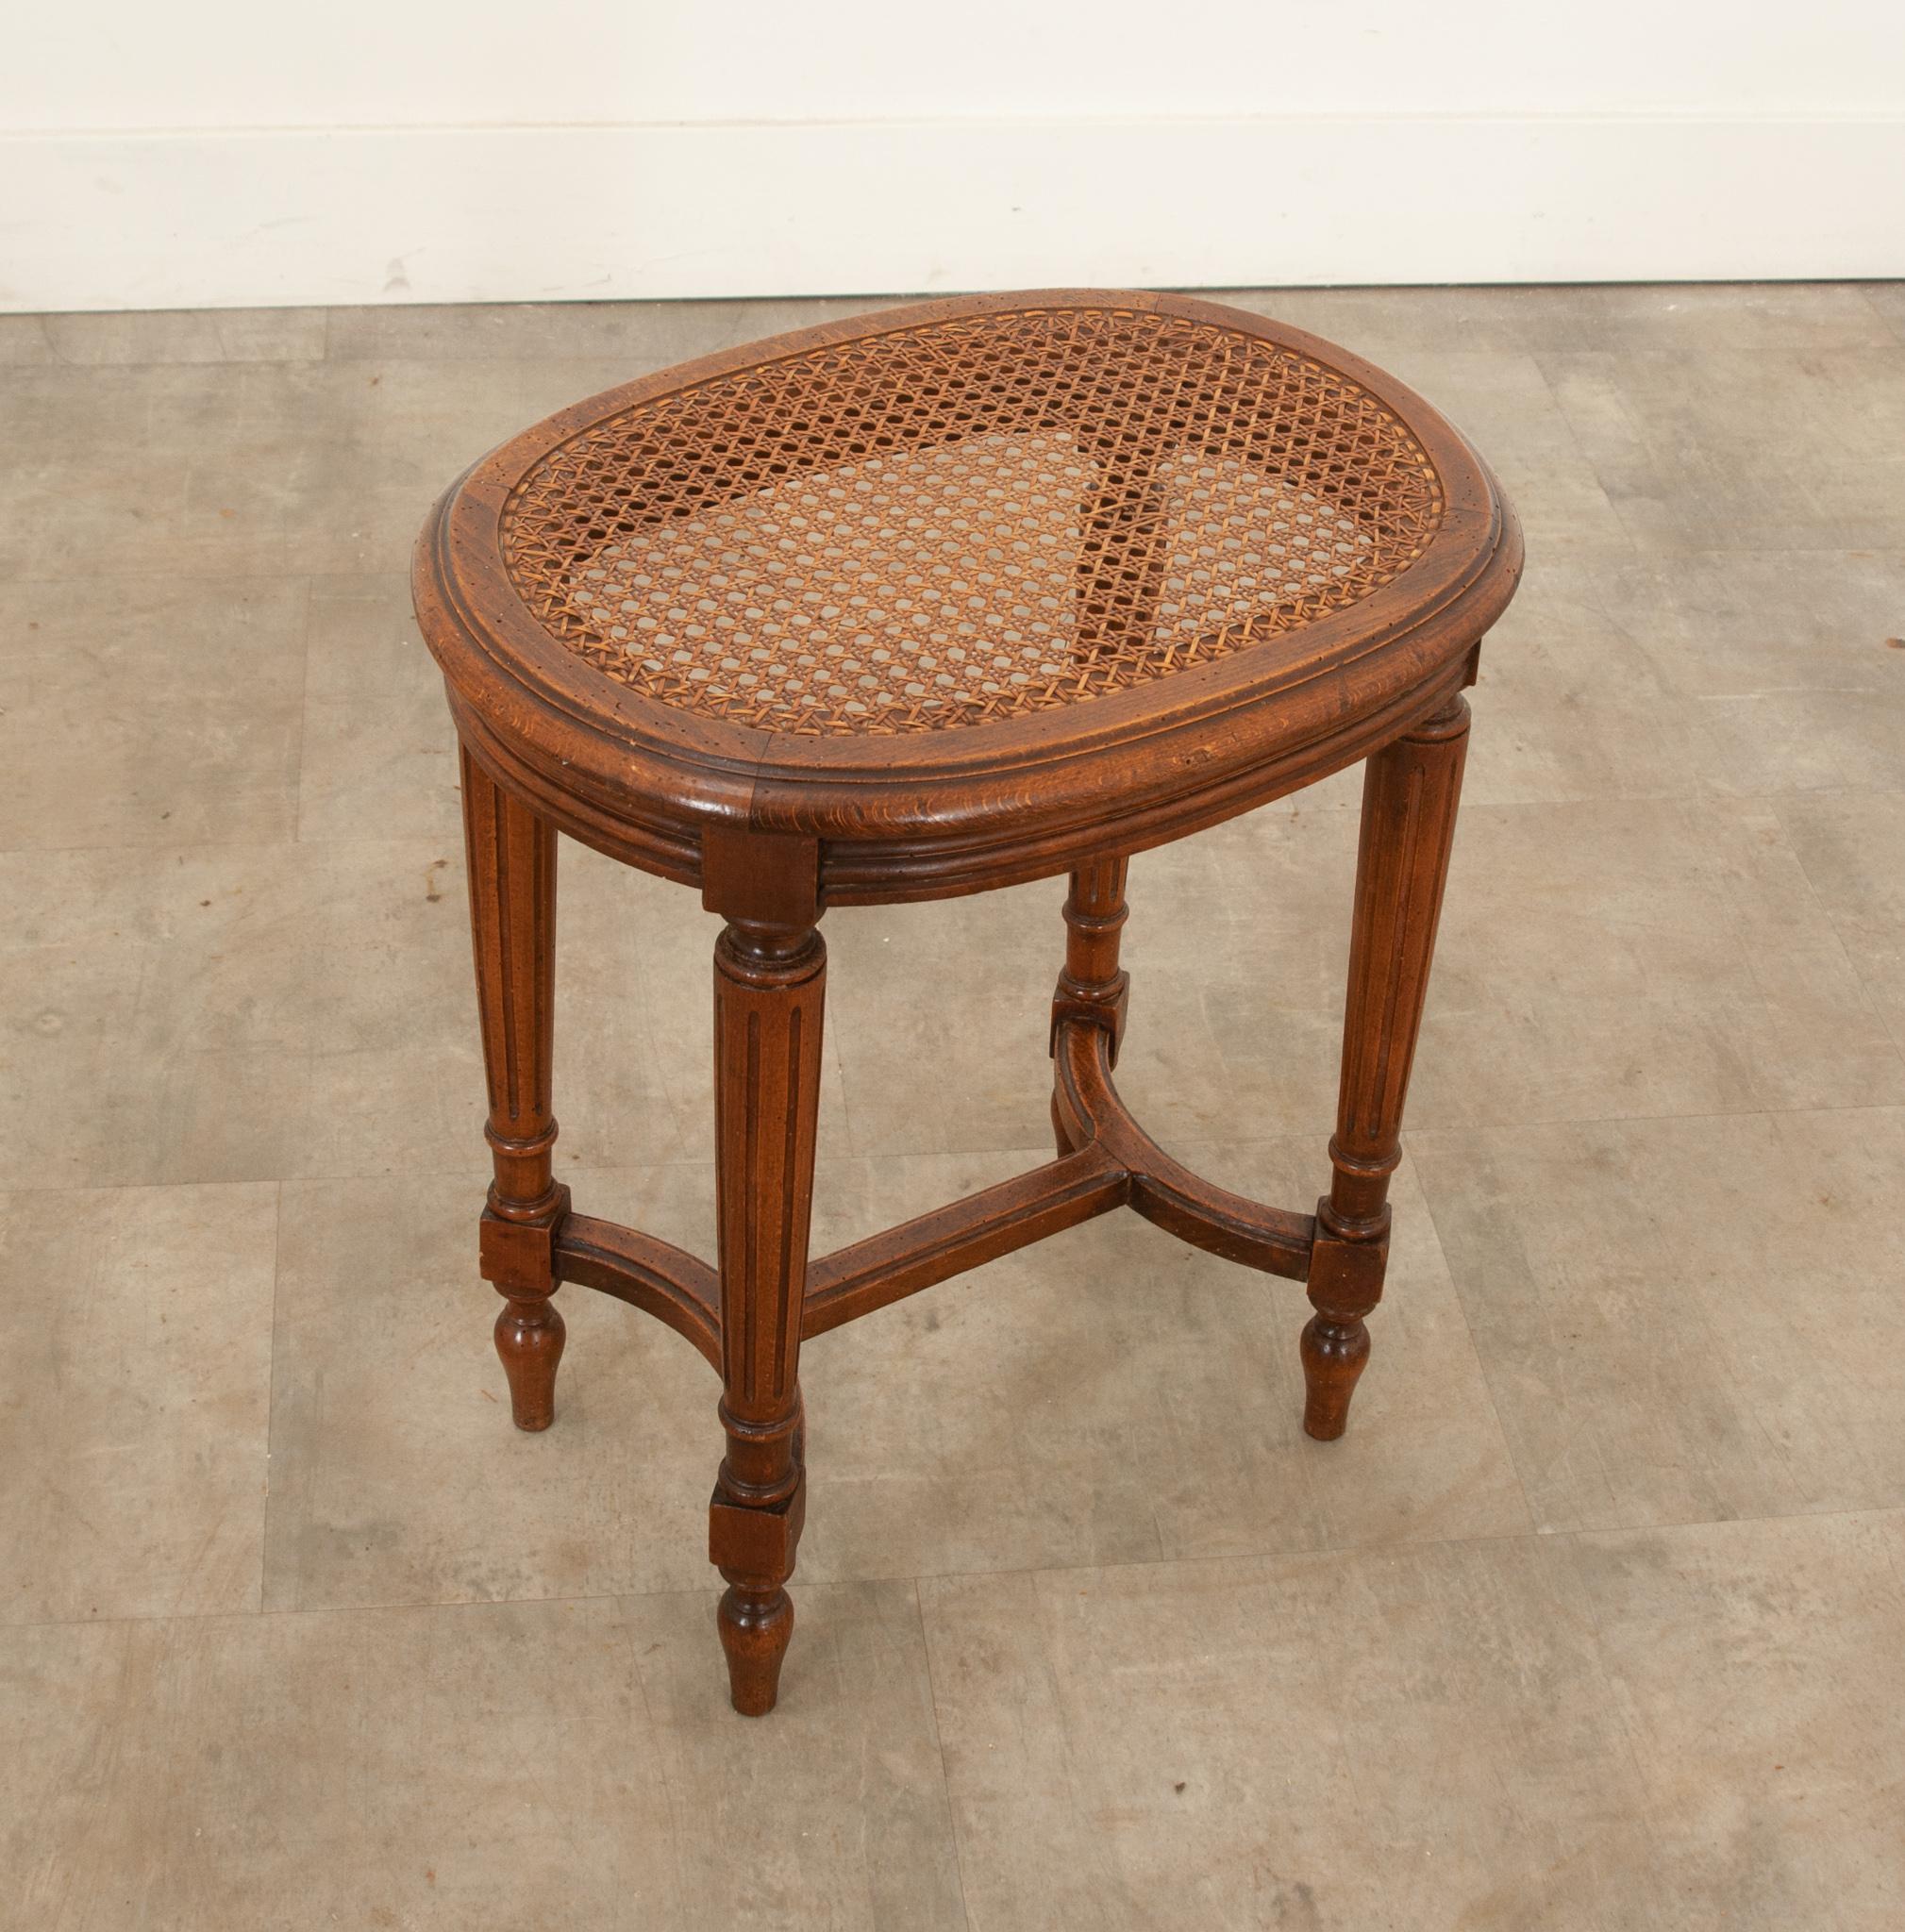 A French 19th century Louis XVI style hand-carved oak stool with cane top. Its oval top with a smooth, molded and trimmed edge holds original and perfect caning, and  it showcases the lovely rich tone of the well patinated oak. The top sits on a